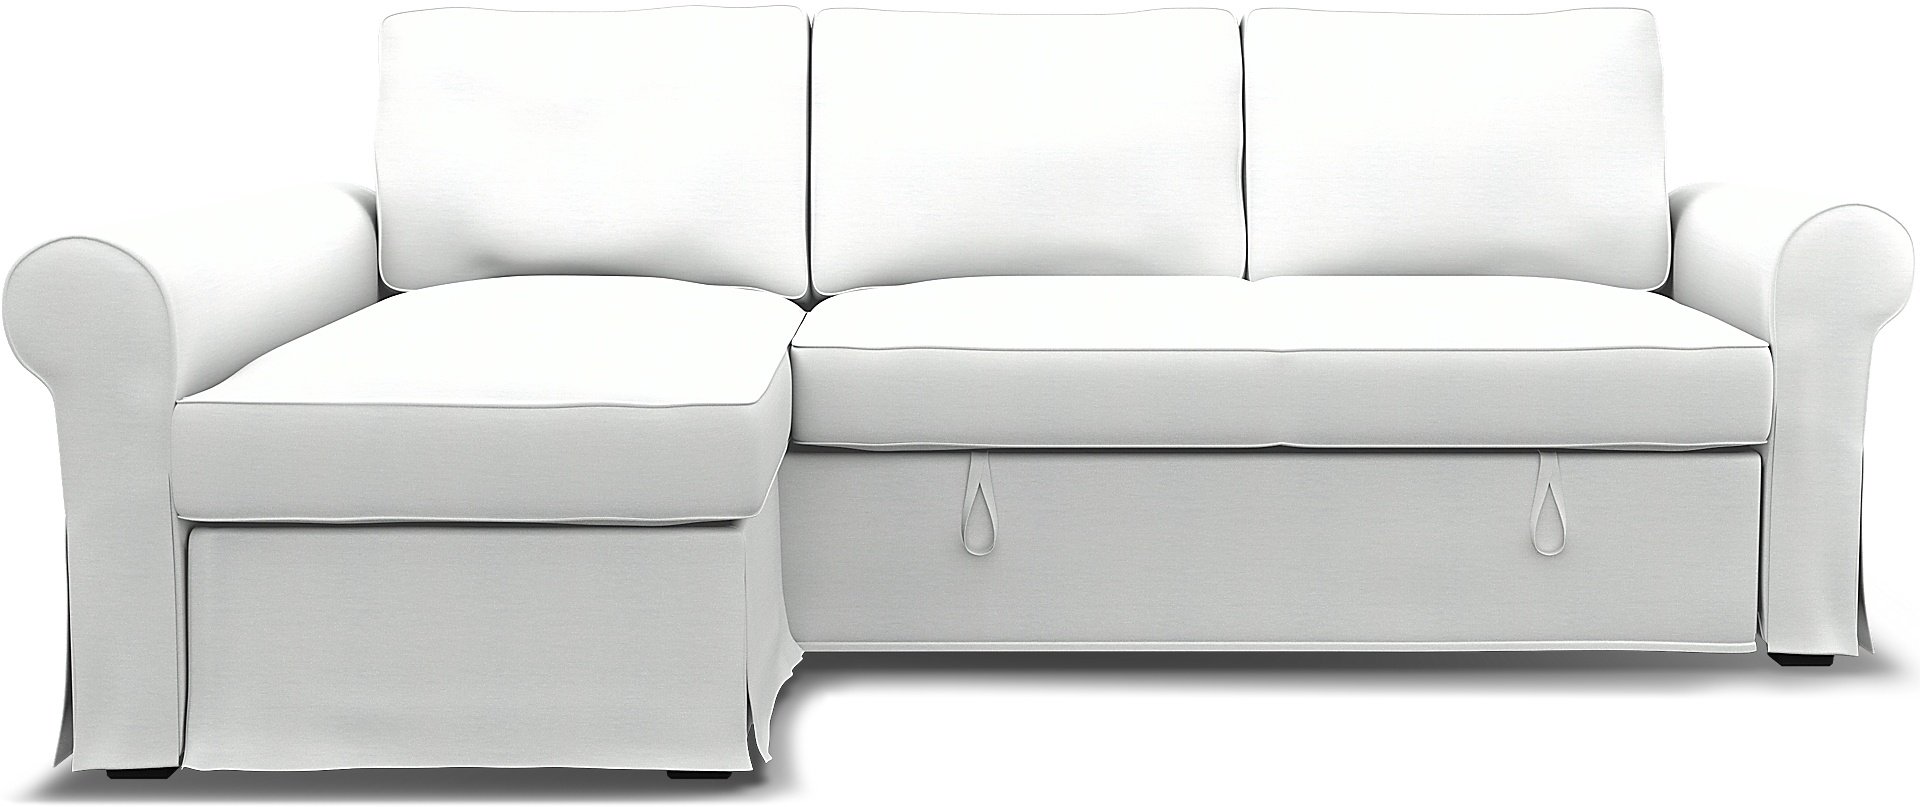 IKEA - Backabro Sofabed with Chaise Cover, White, Linen - Bemz